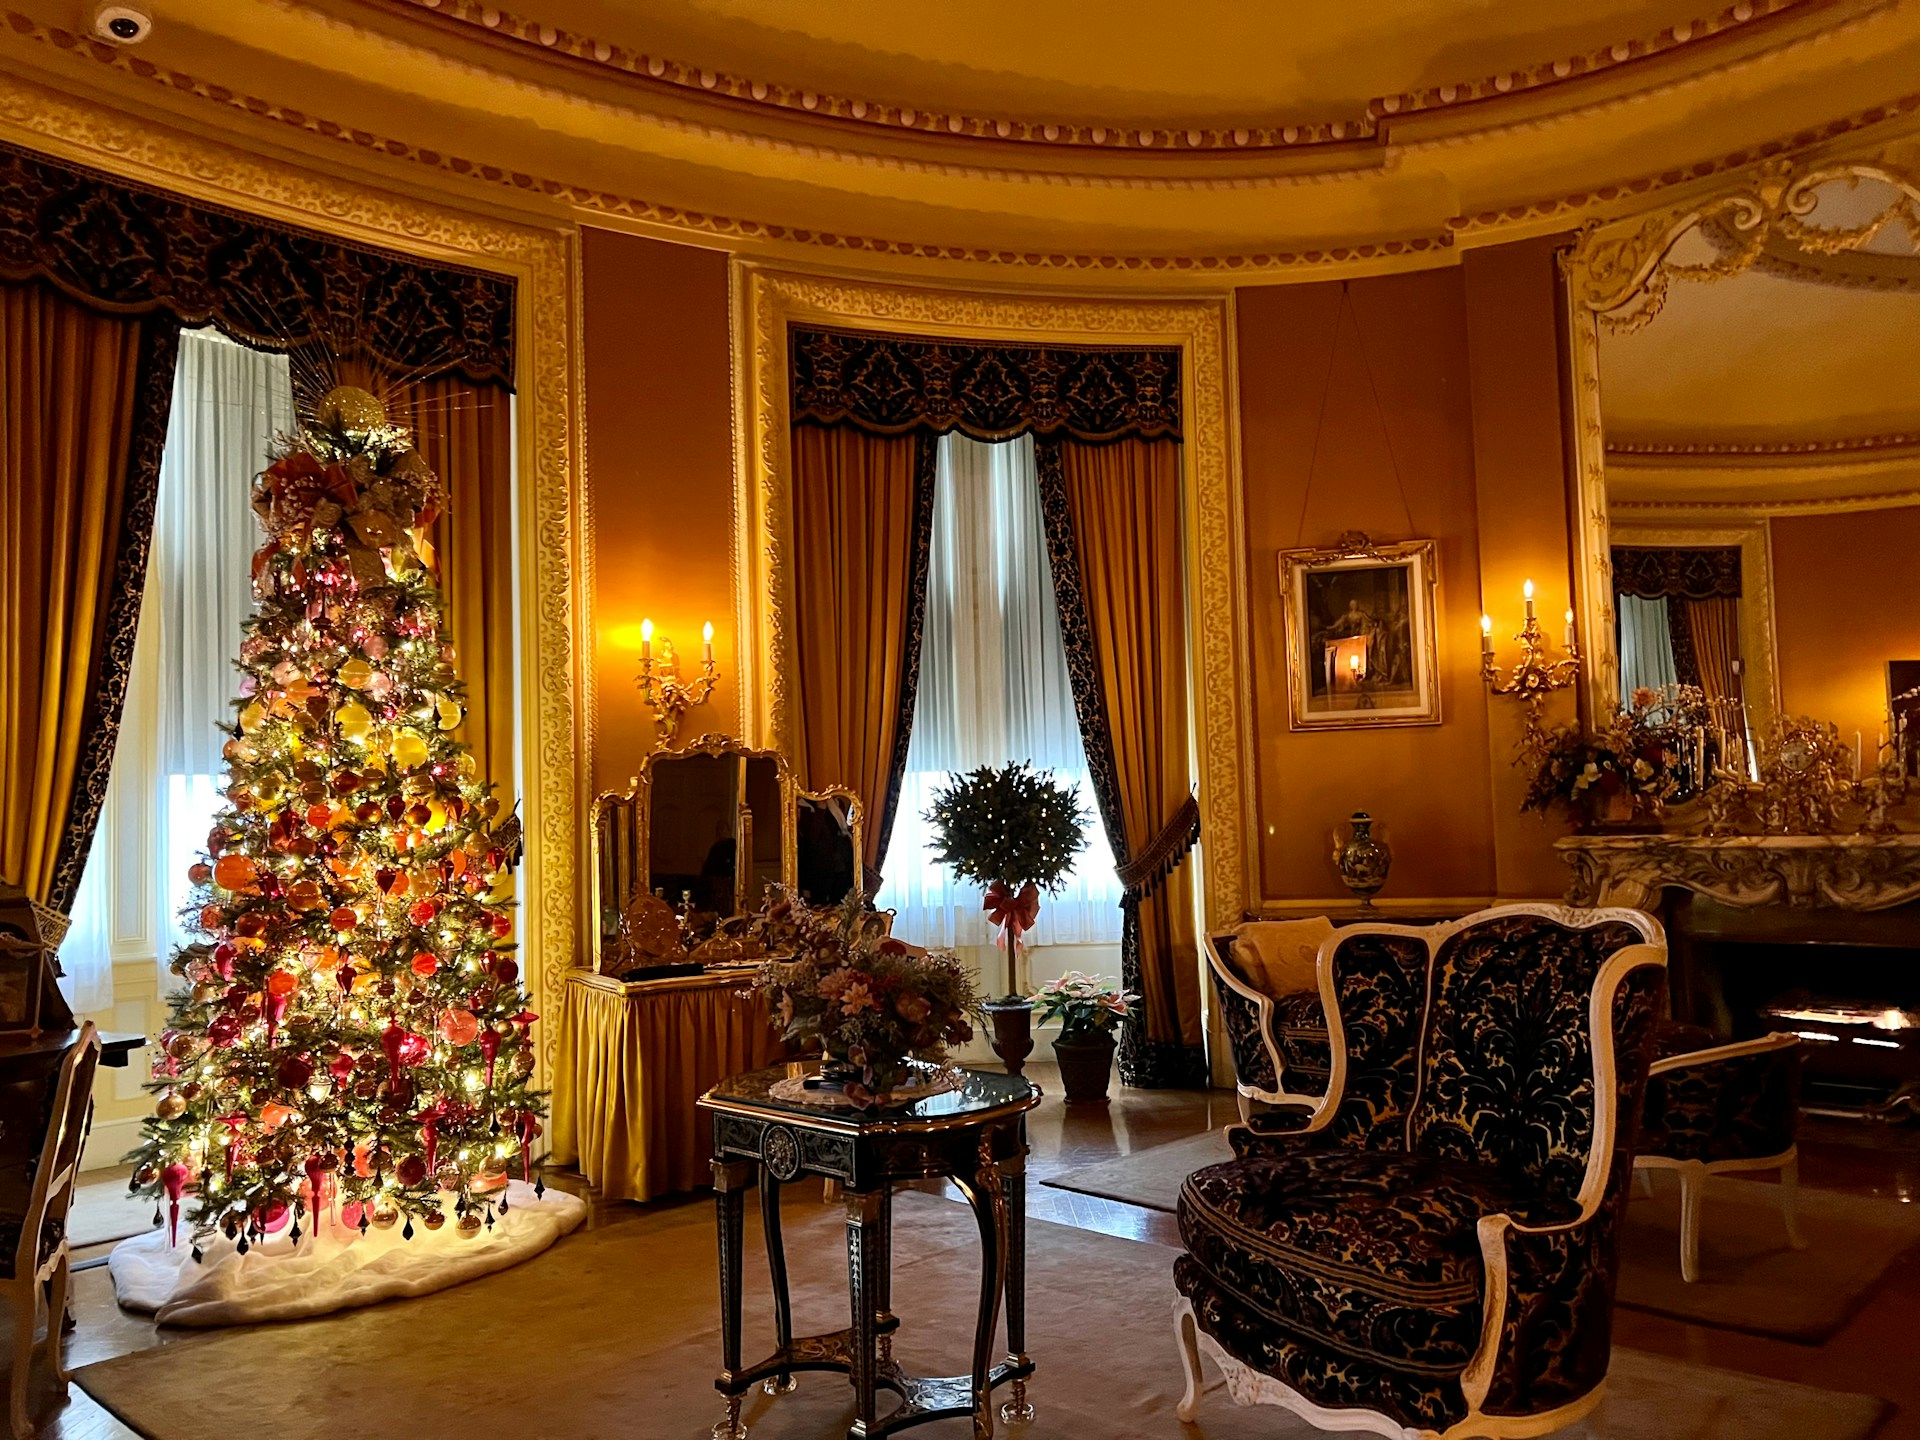 Discover Christmas at Biltmore in Asheville